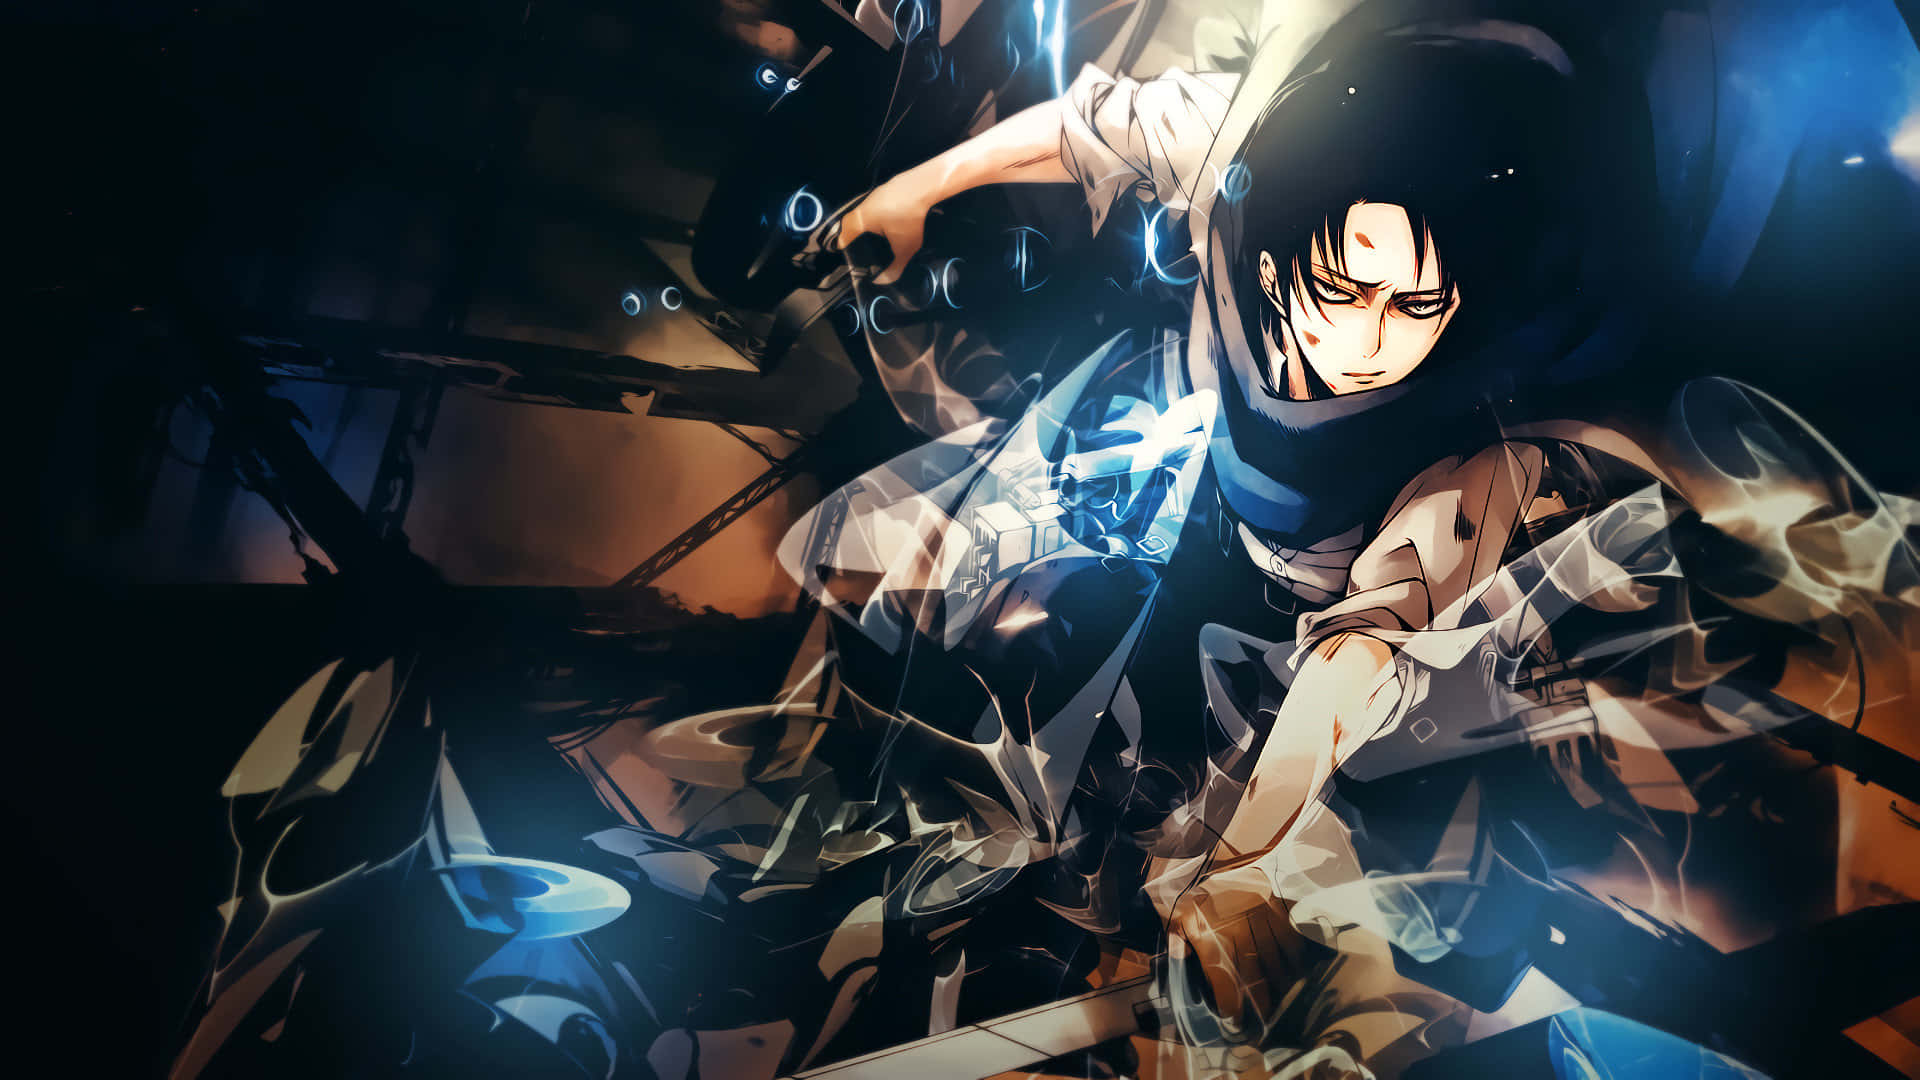 Download Join the Scout Regiment with Levi Ackerman Wallpaper ...